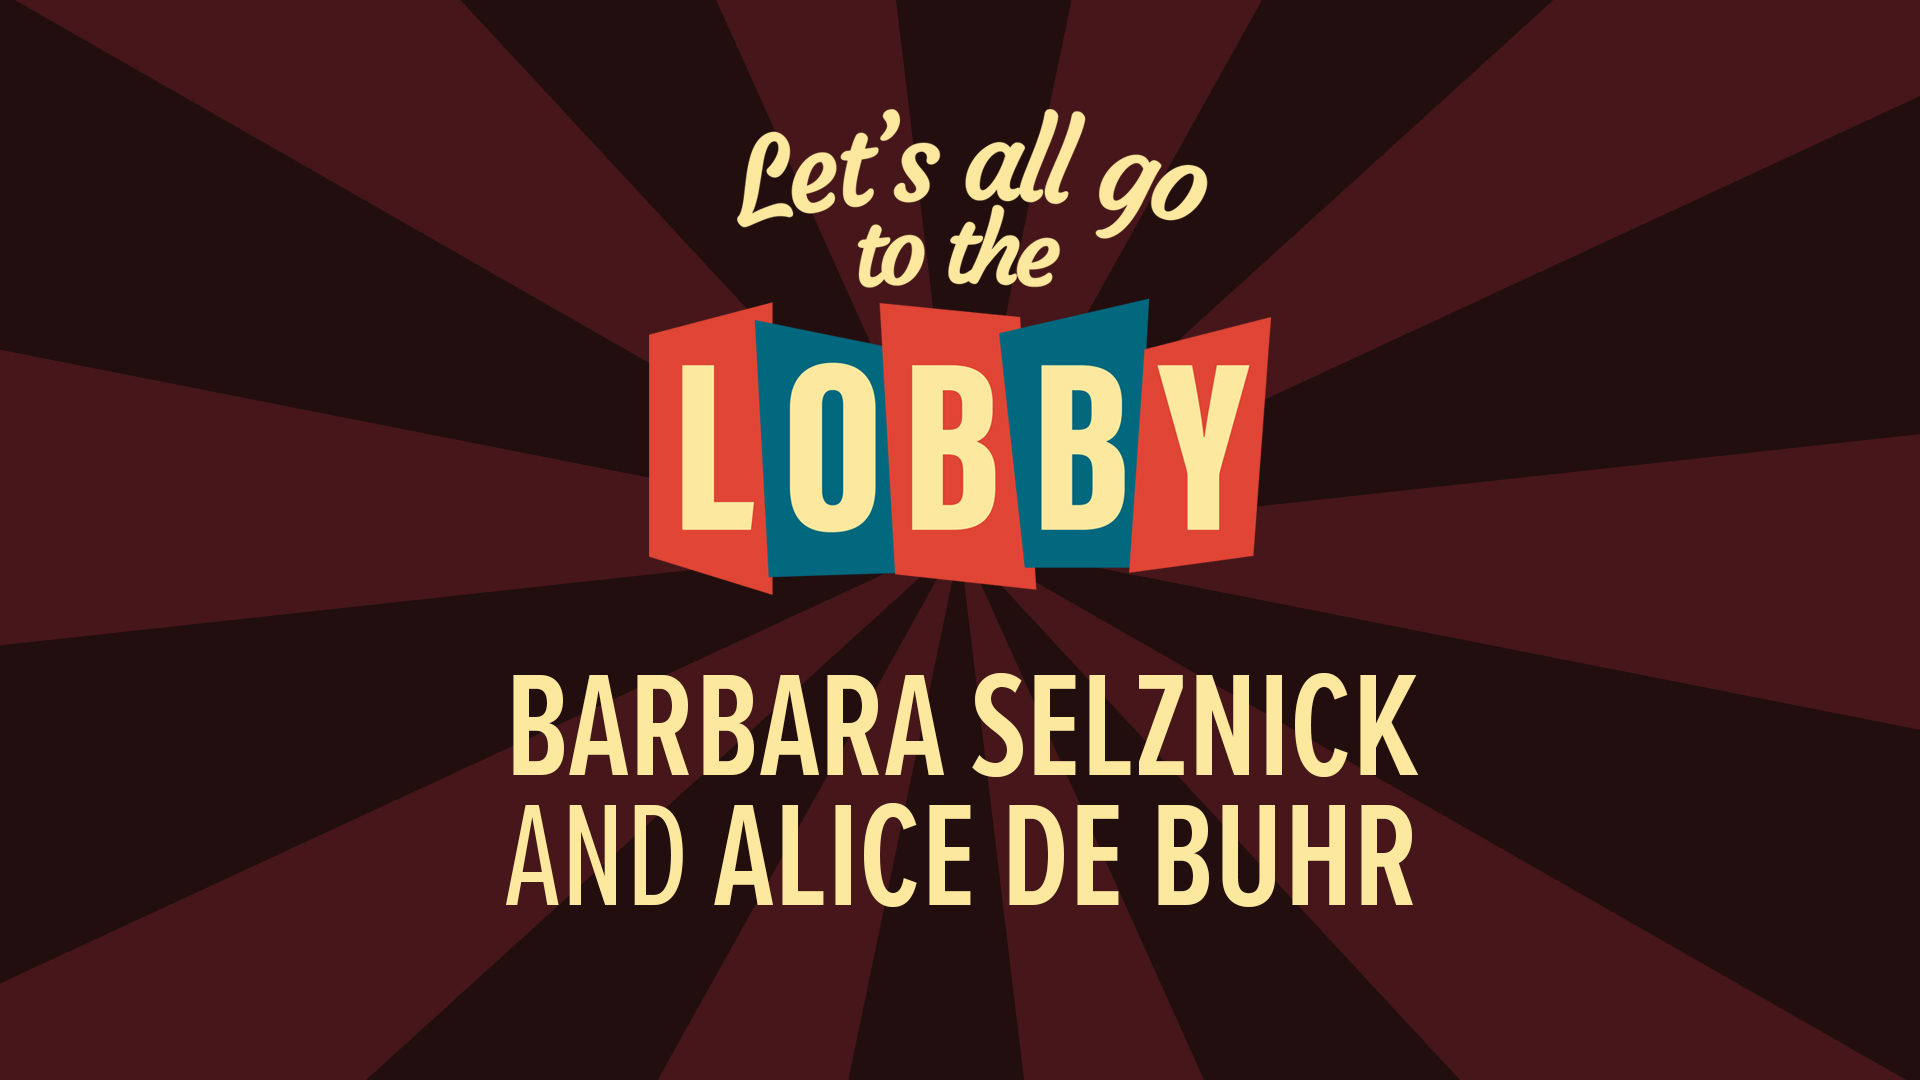 Today's Guests: Barbara Selznick and Alice de Buhr